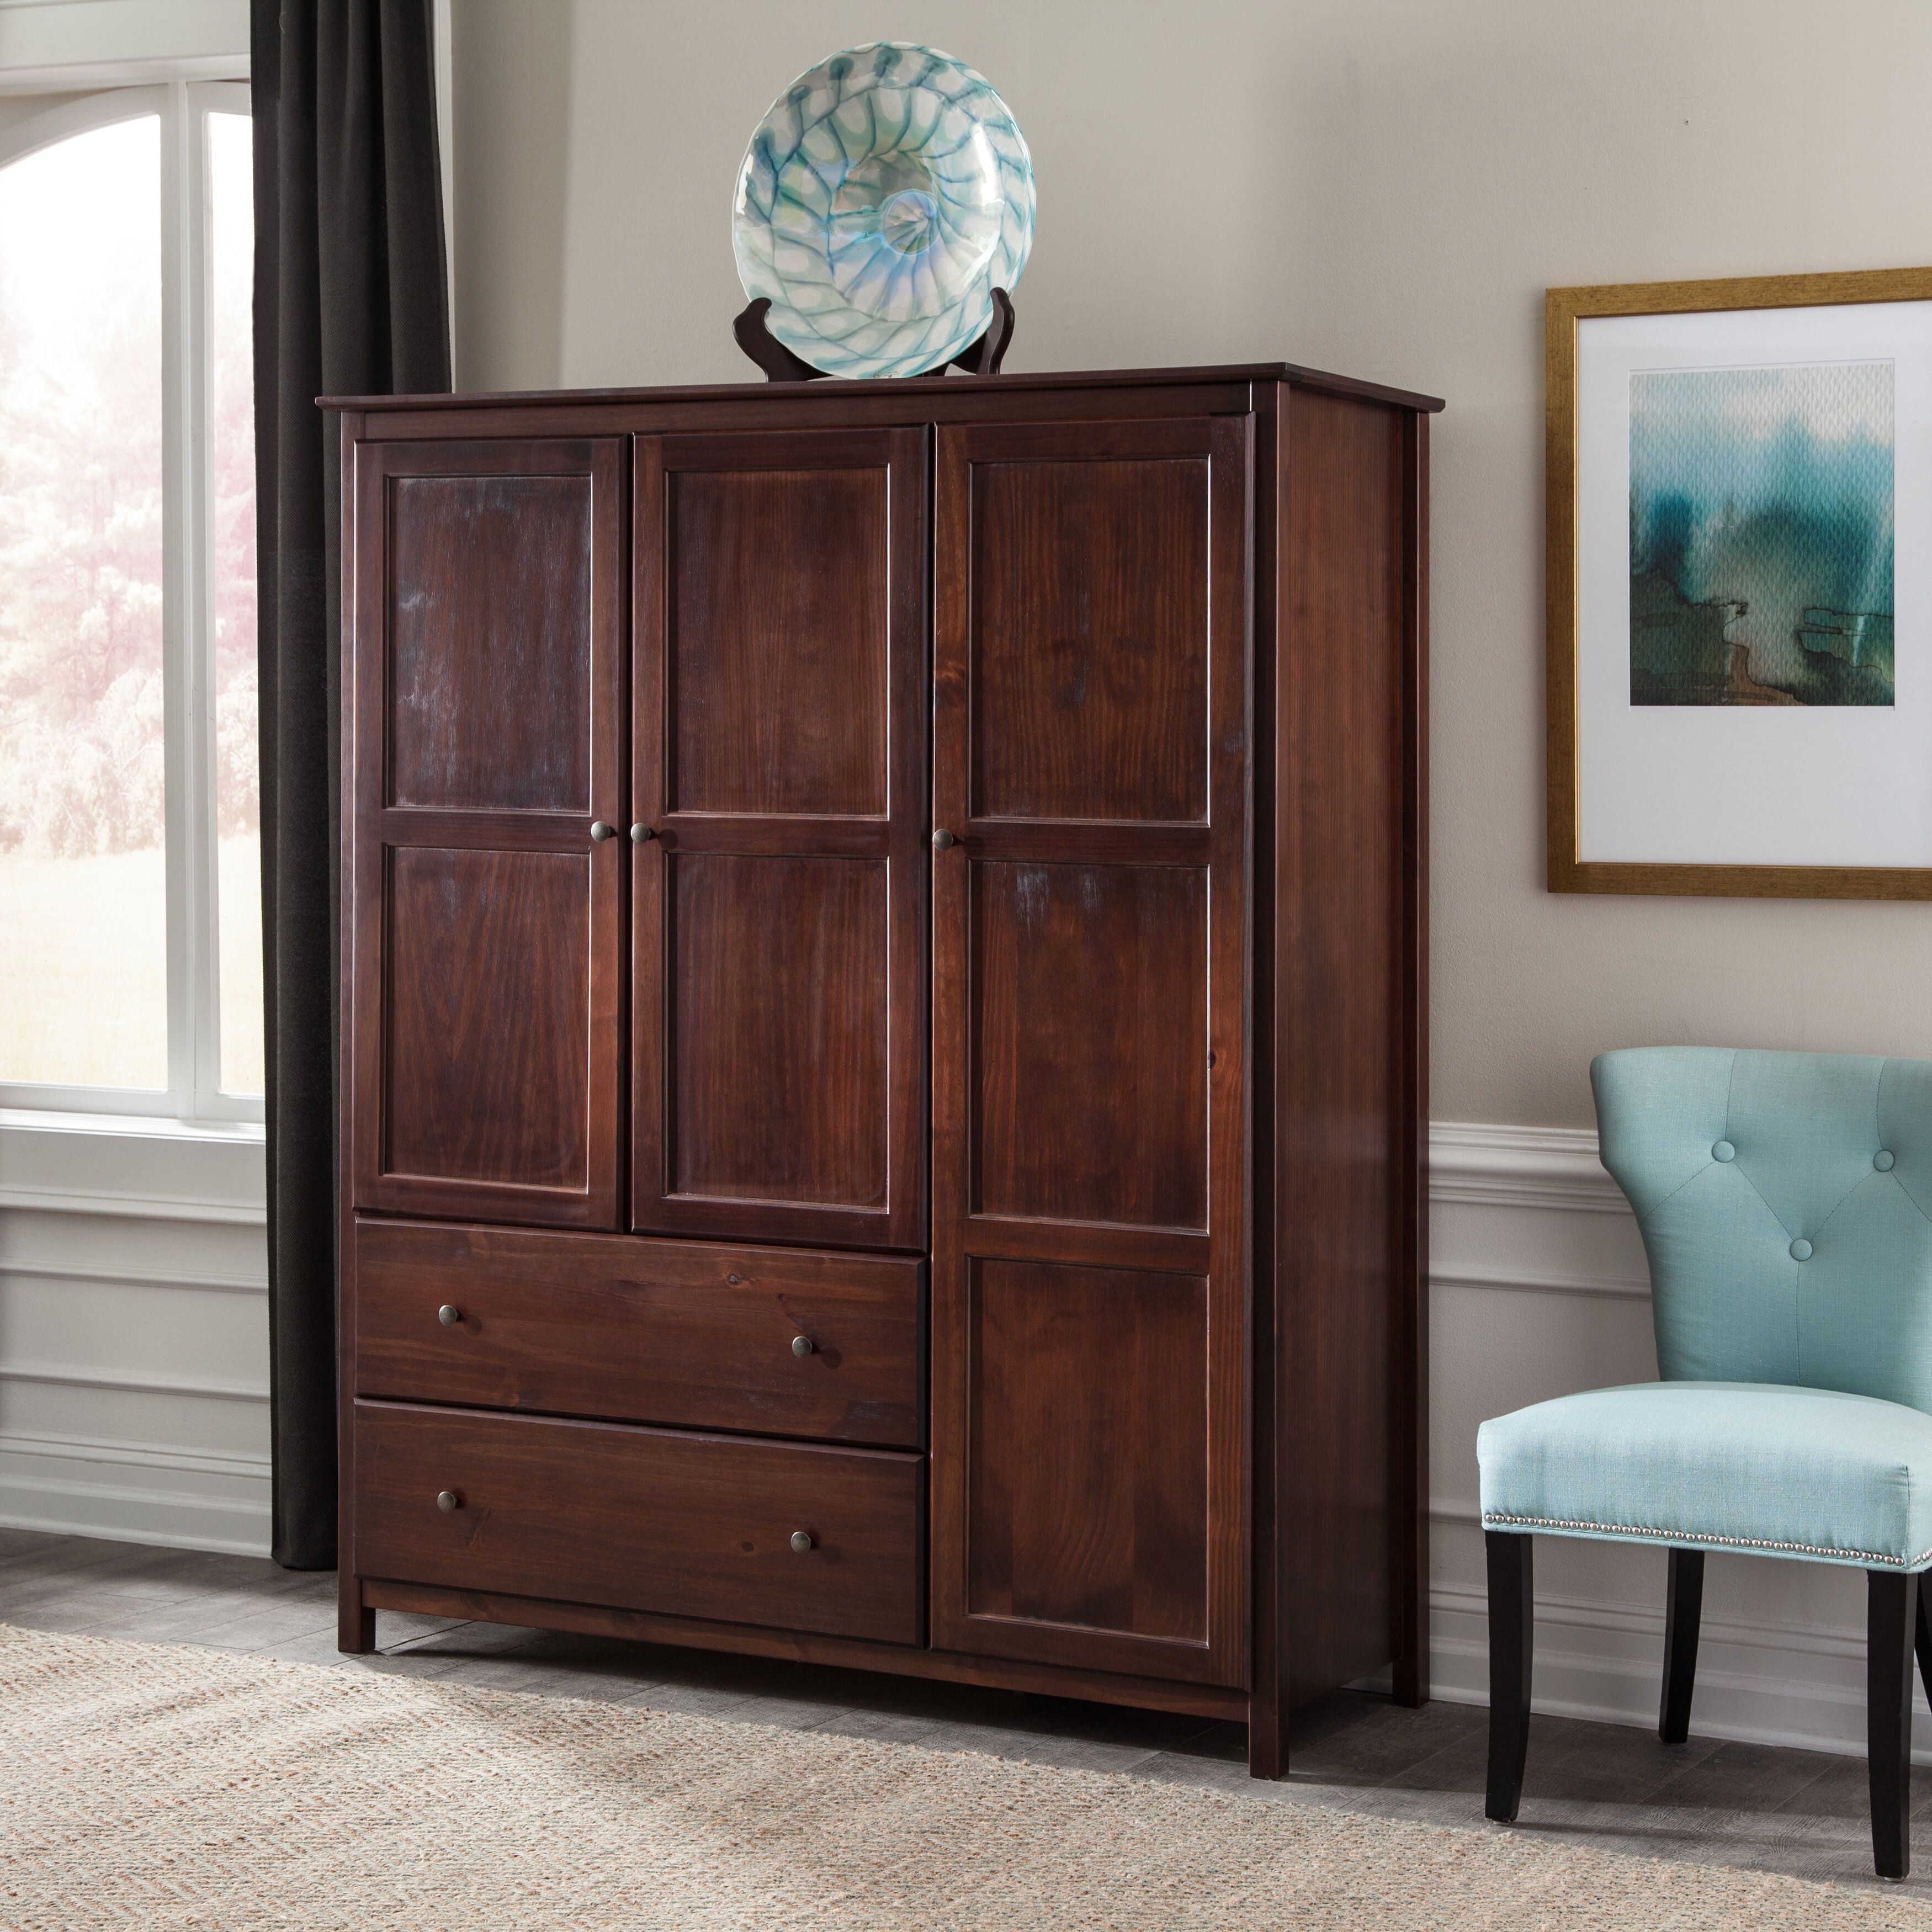 Grain Wood Furniture Shaker Solid Wood Armoire & Reviews | Wayfair Within Wardrobes In Cherry (View 13 of 15)